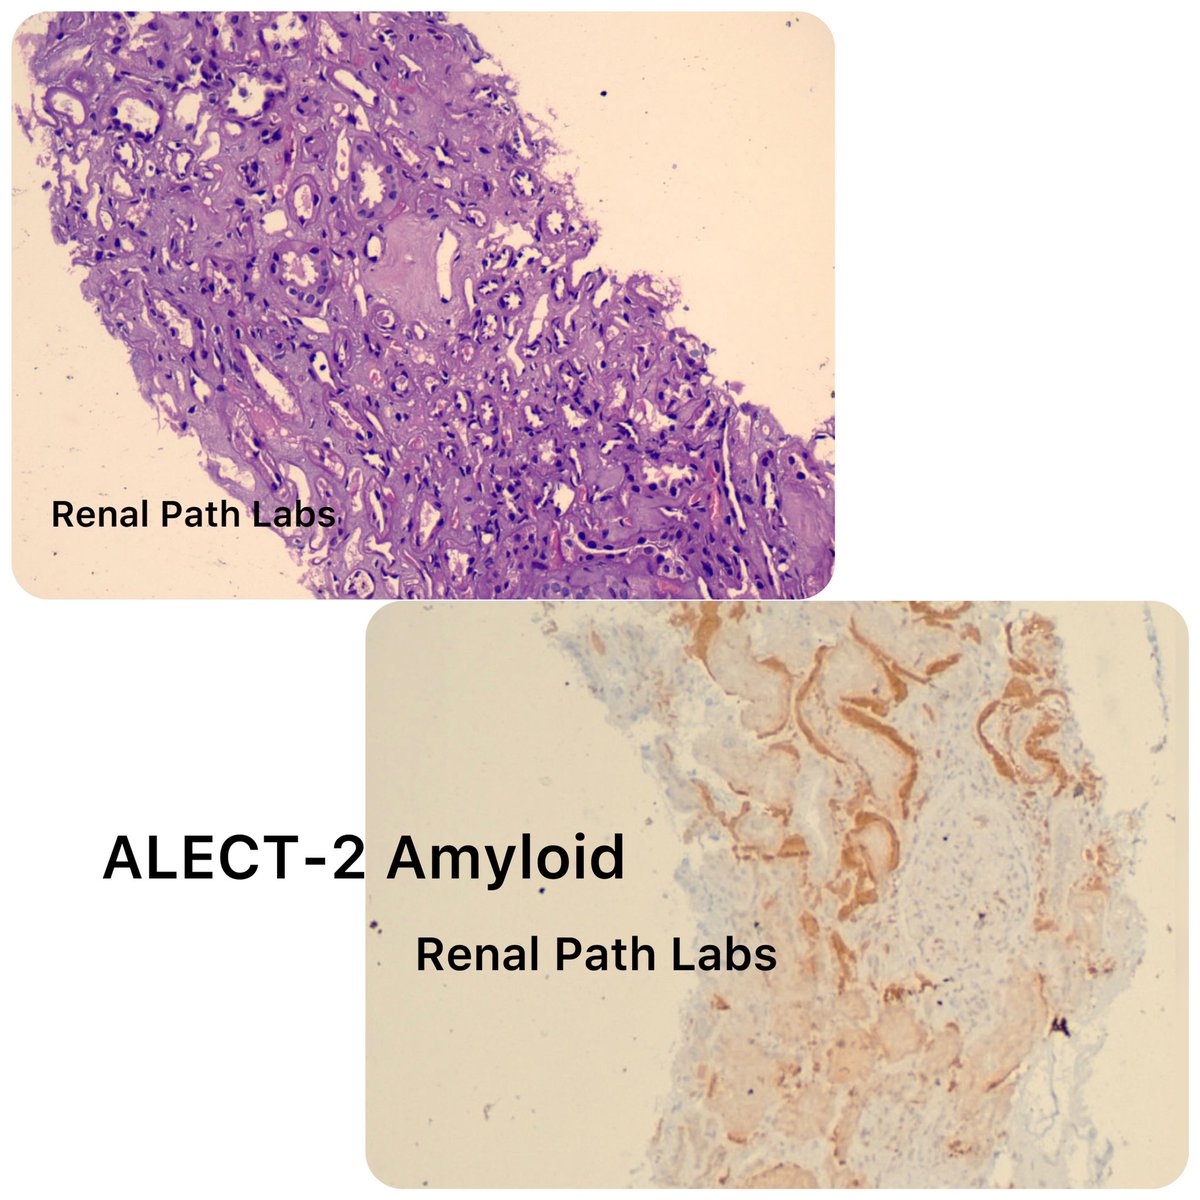 ALECT-2 Amyloid-Is it that rare in India??
Need to document each case!
May be missed easily!
#AskRenalPath #RenalPath #RenalPathScoiety #askRenal
#RareCase #Nephrologists
#LECT2Amyloid #PoojaMaheshwari